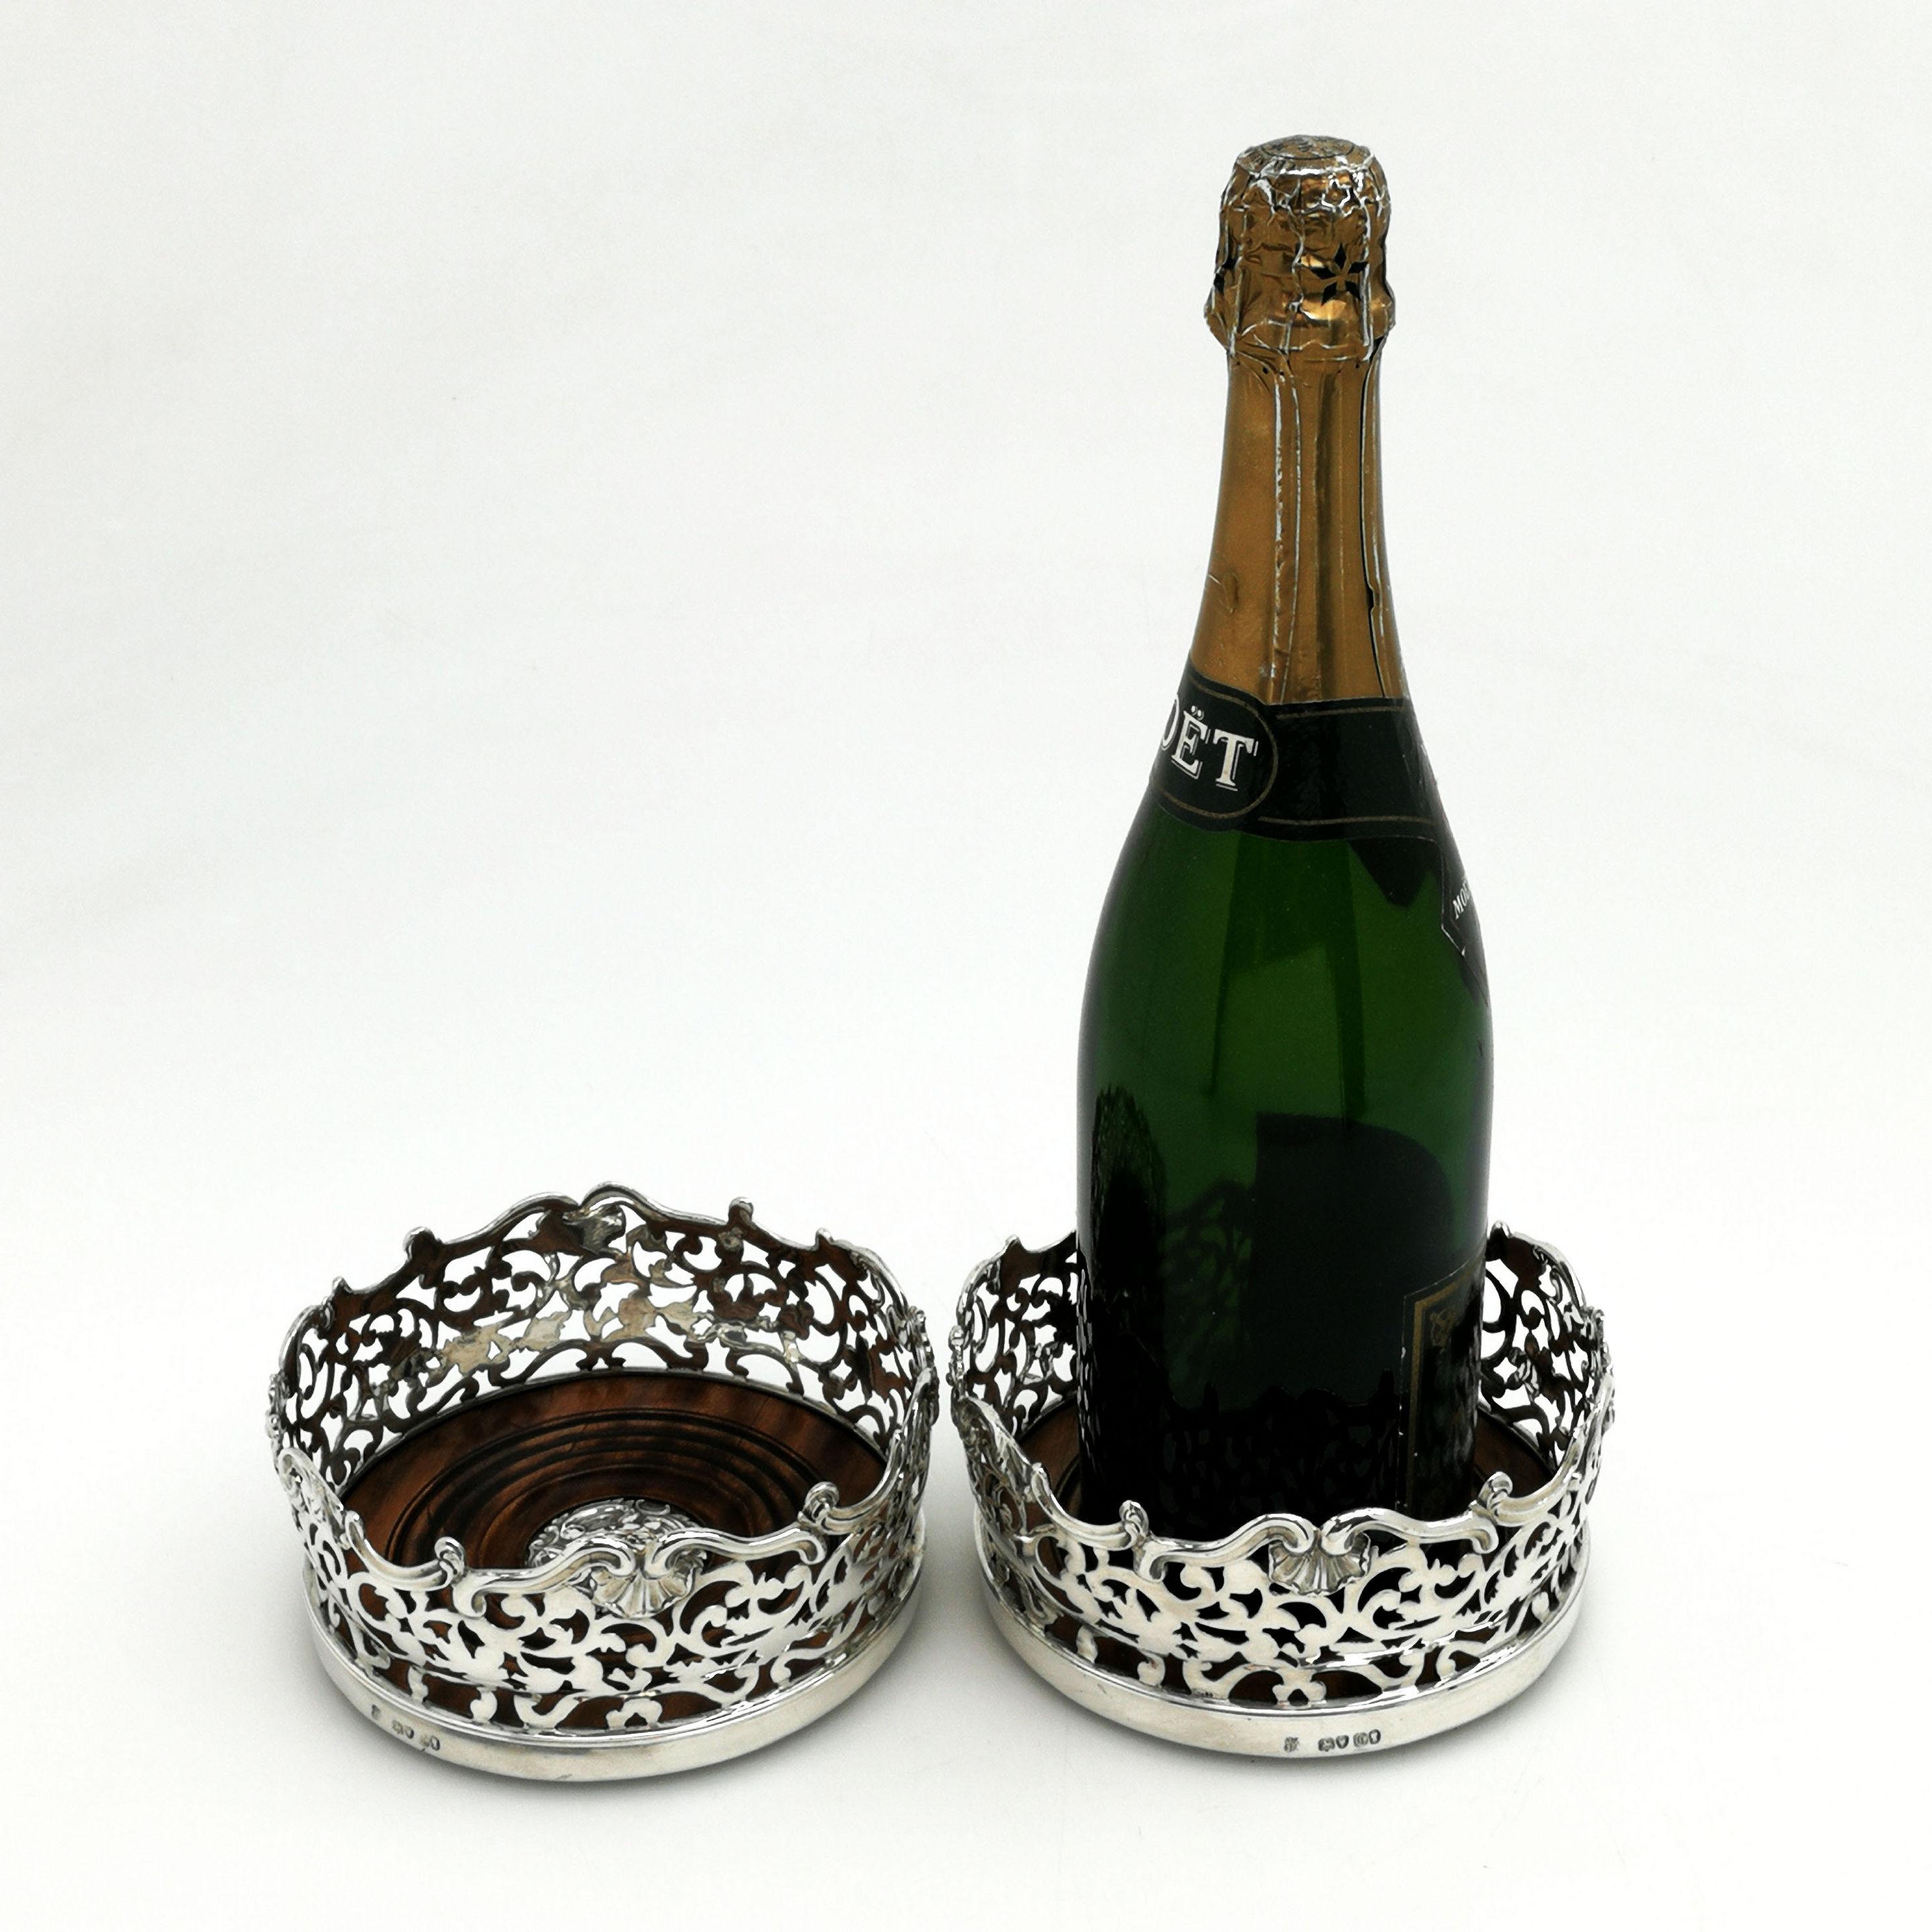 A pair of magnificent Antique solid Silver Wine Bottle Coasters embellished with an ornate pierced pattern around the tall sides of the coaster. The rim of the Coaster has an ornate shell and scroll border and the wooden base of the coaster has an